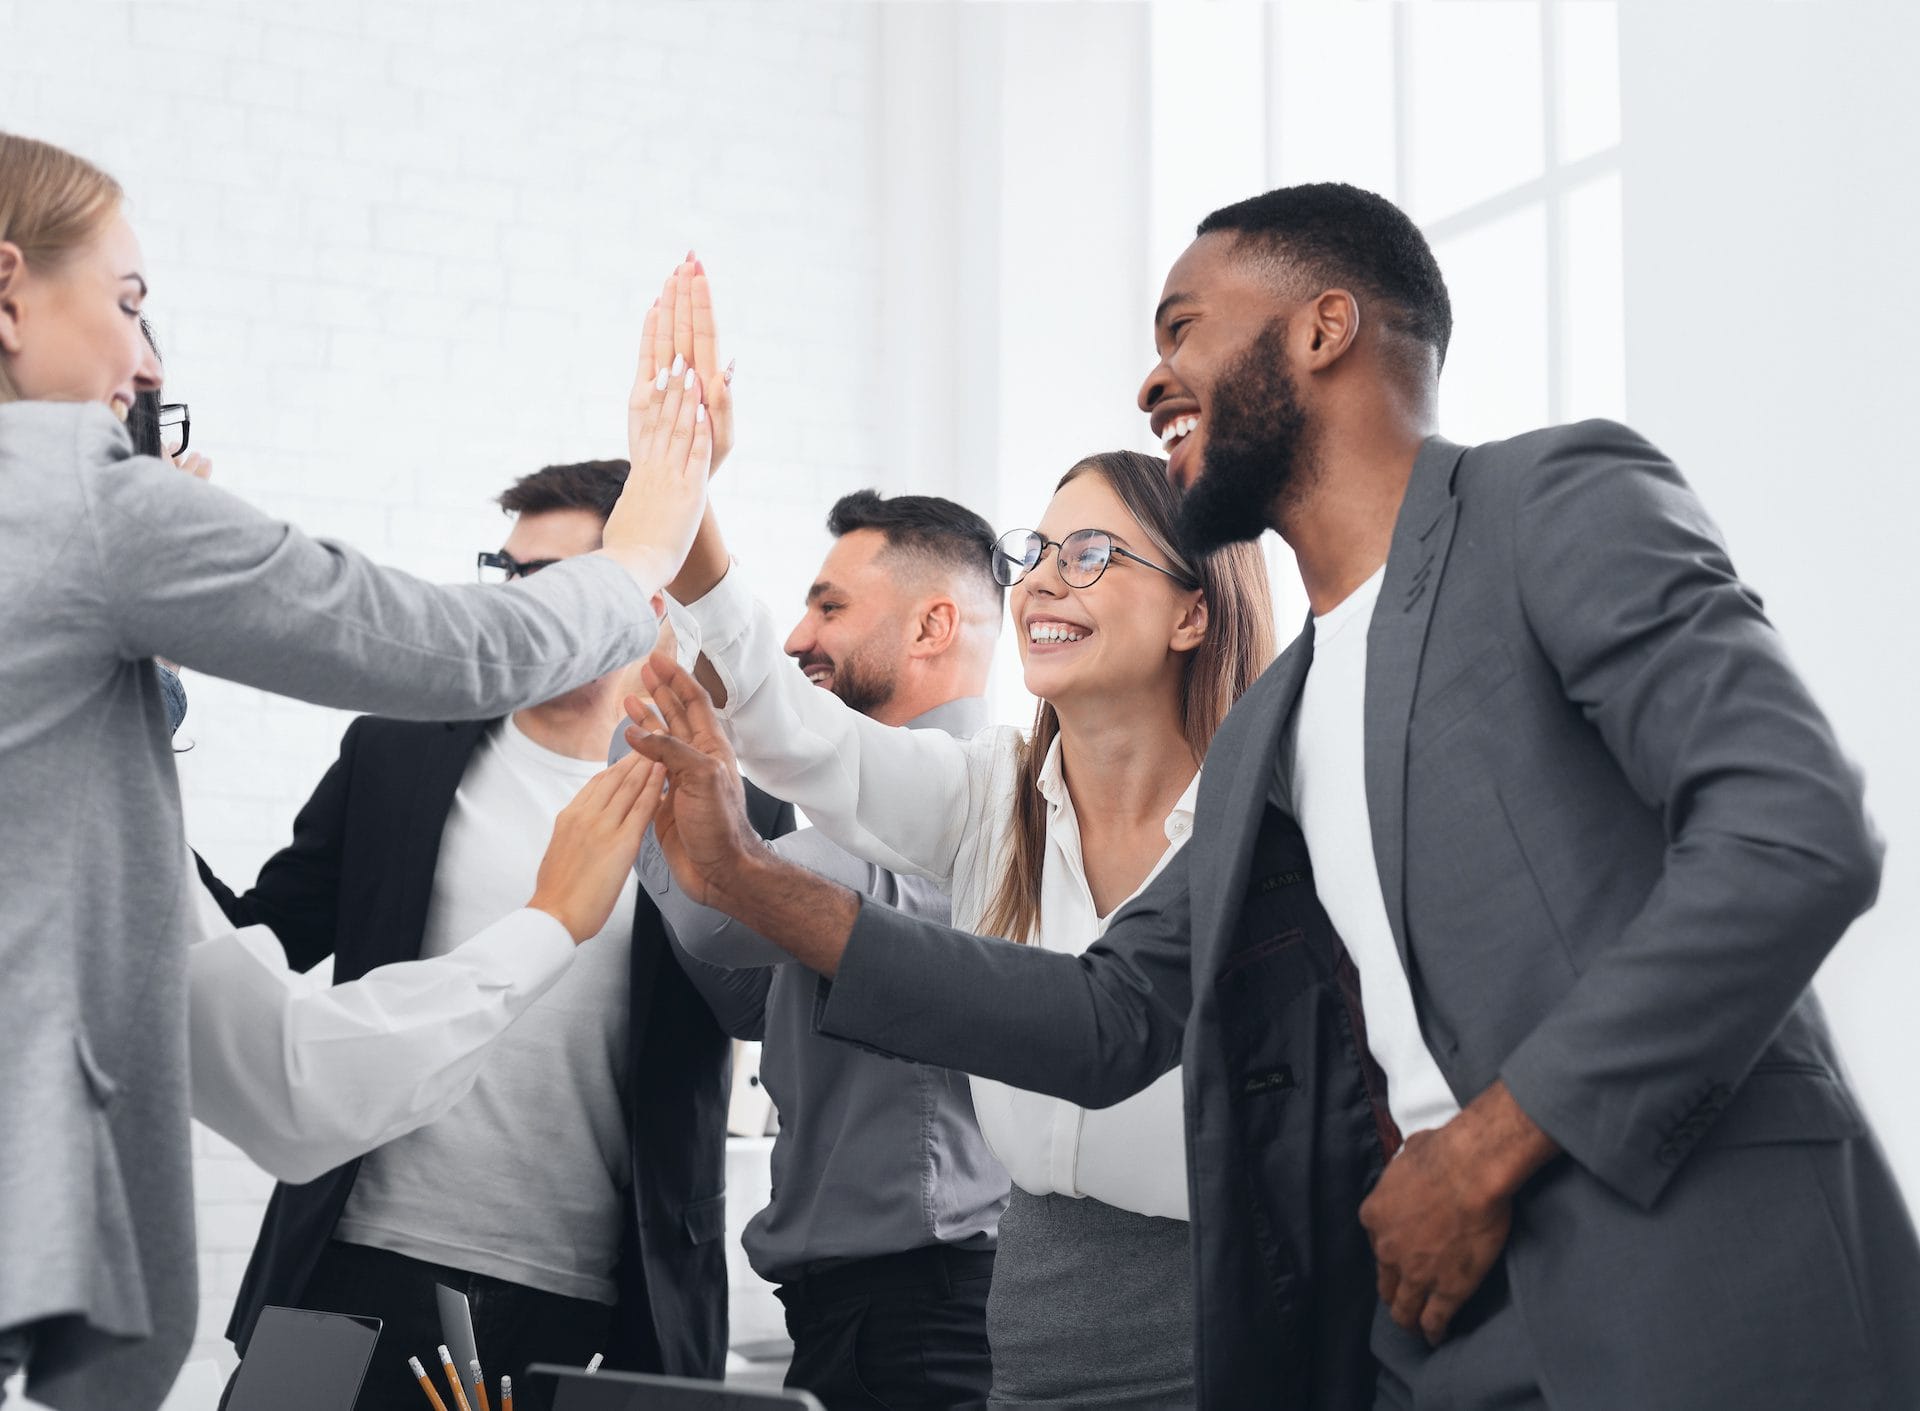 Business team giving group high five, celebrating